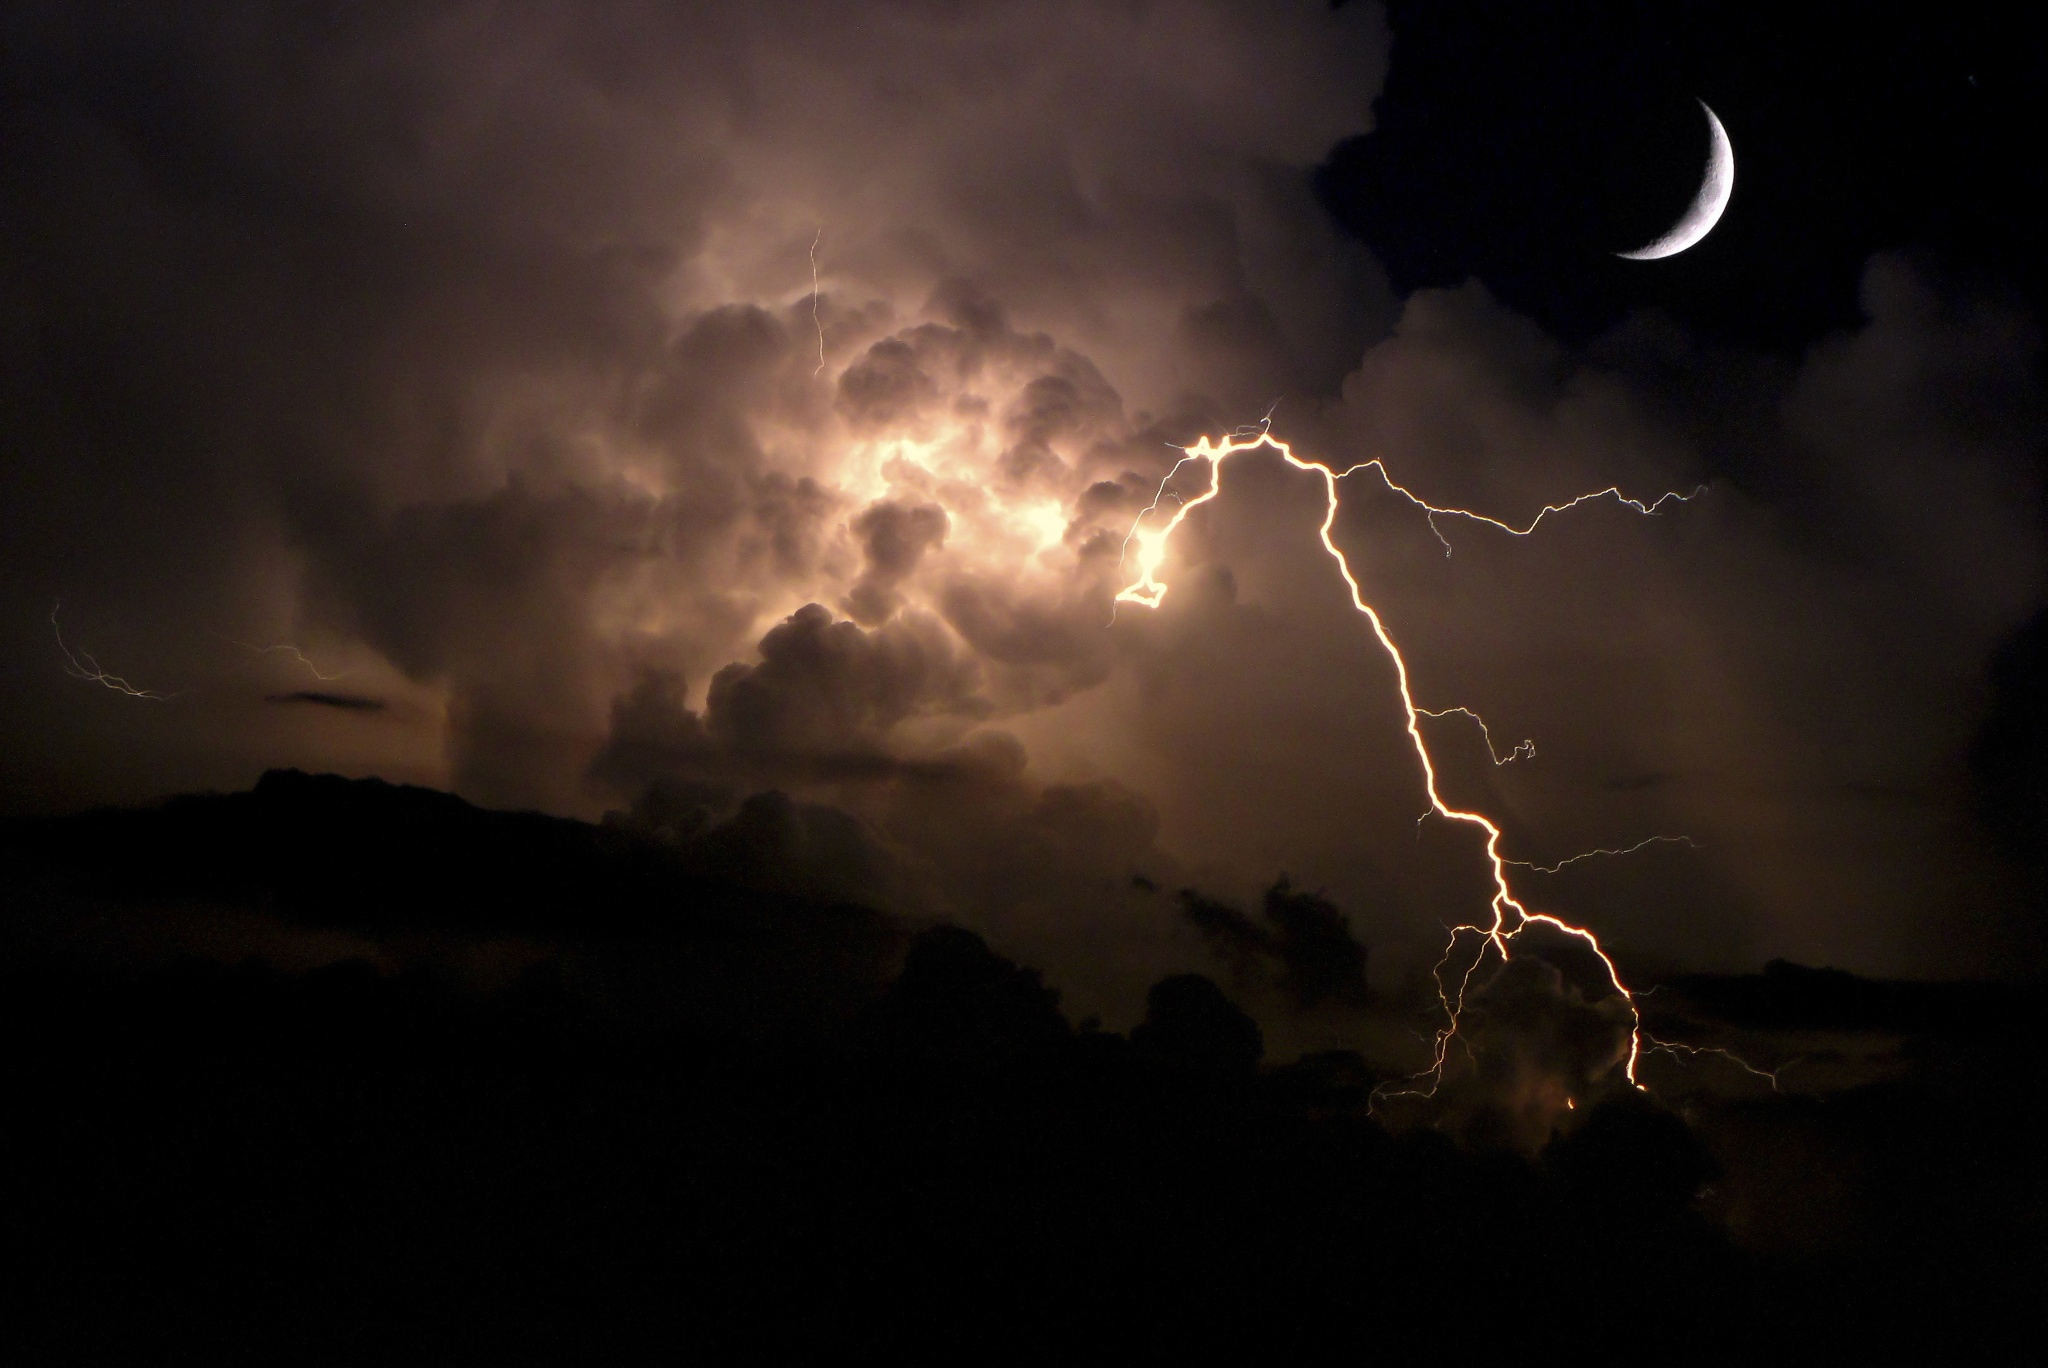 Tutorial: A Beginner's Guide to Photographing Lightning